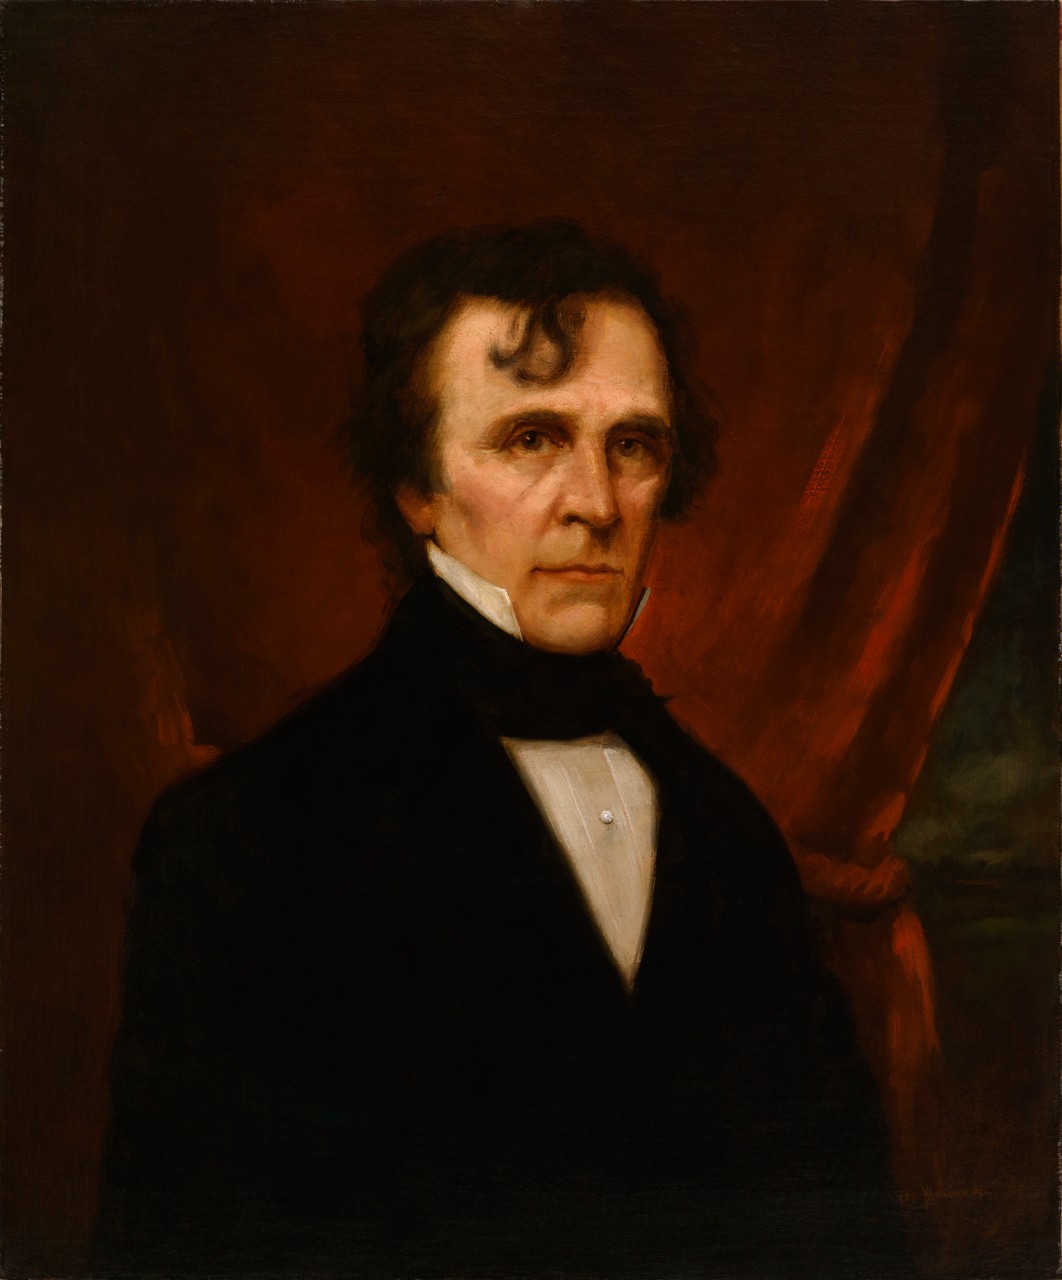 Portrait of Secretary of the Navy Isaac Toucey